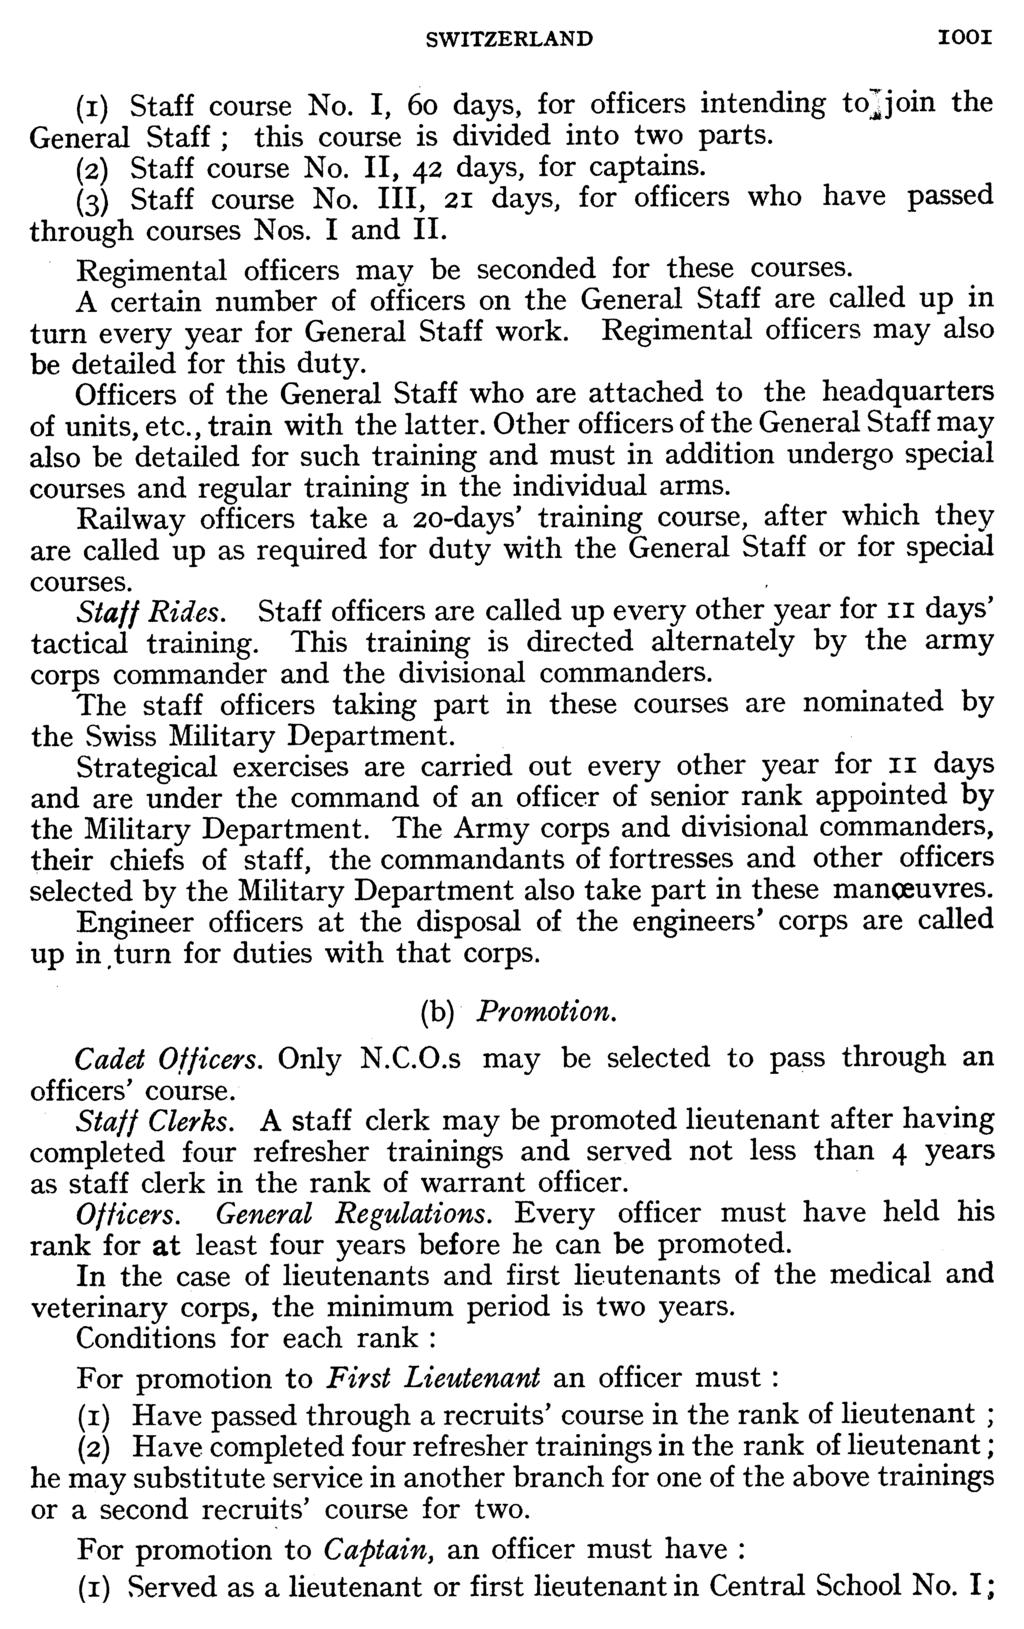 SWITZERLAND I00I (i) Staff course No. I, 6o days, for officers intending tojoin the General Staff; this course is divided into two parts. (2) Staff course No. II, 42 days, for captains.